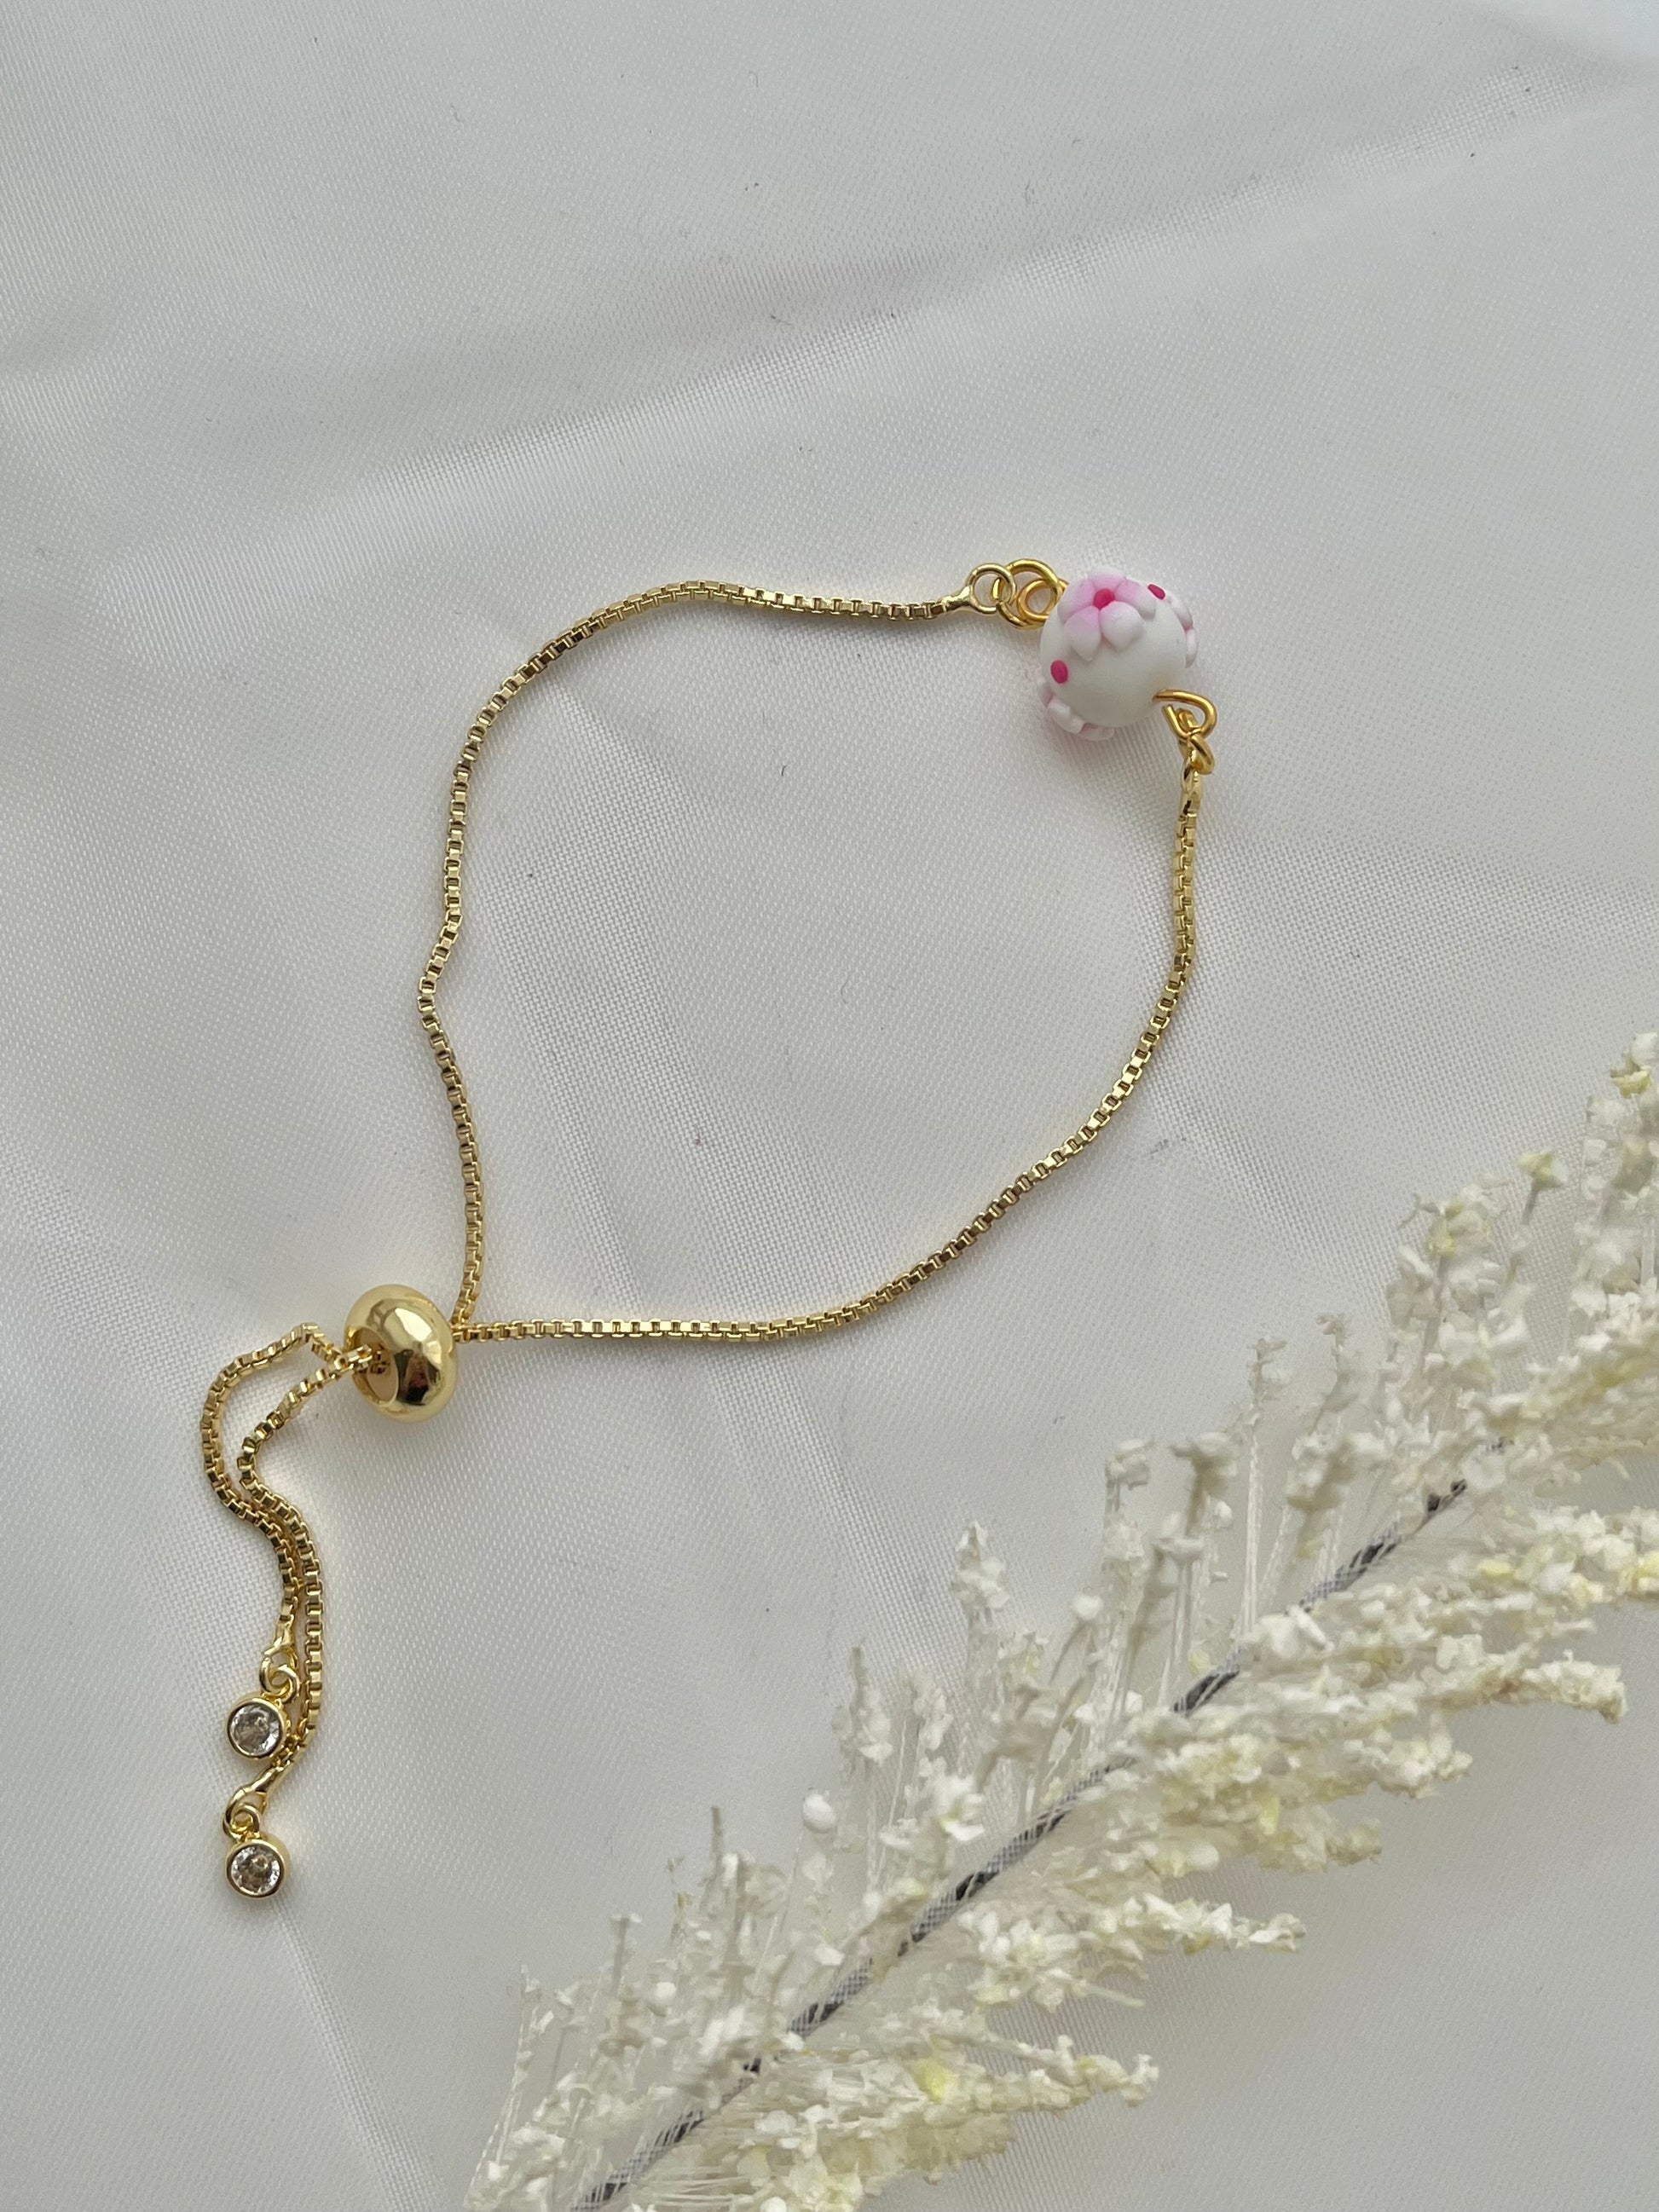 A floral bracelet in cherry blossom style with 1 bead laid flat down to show the adjustable slider